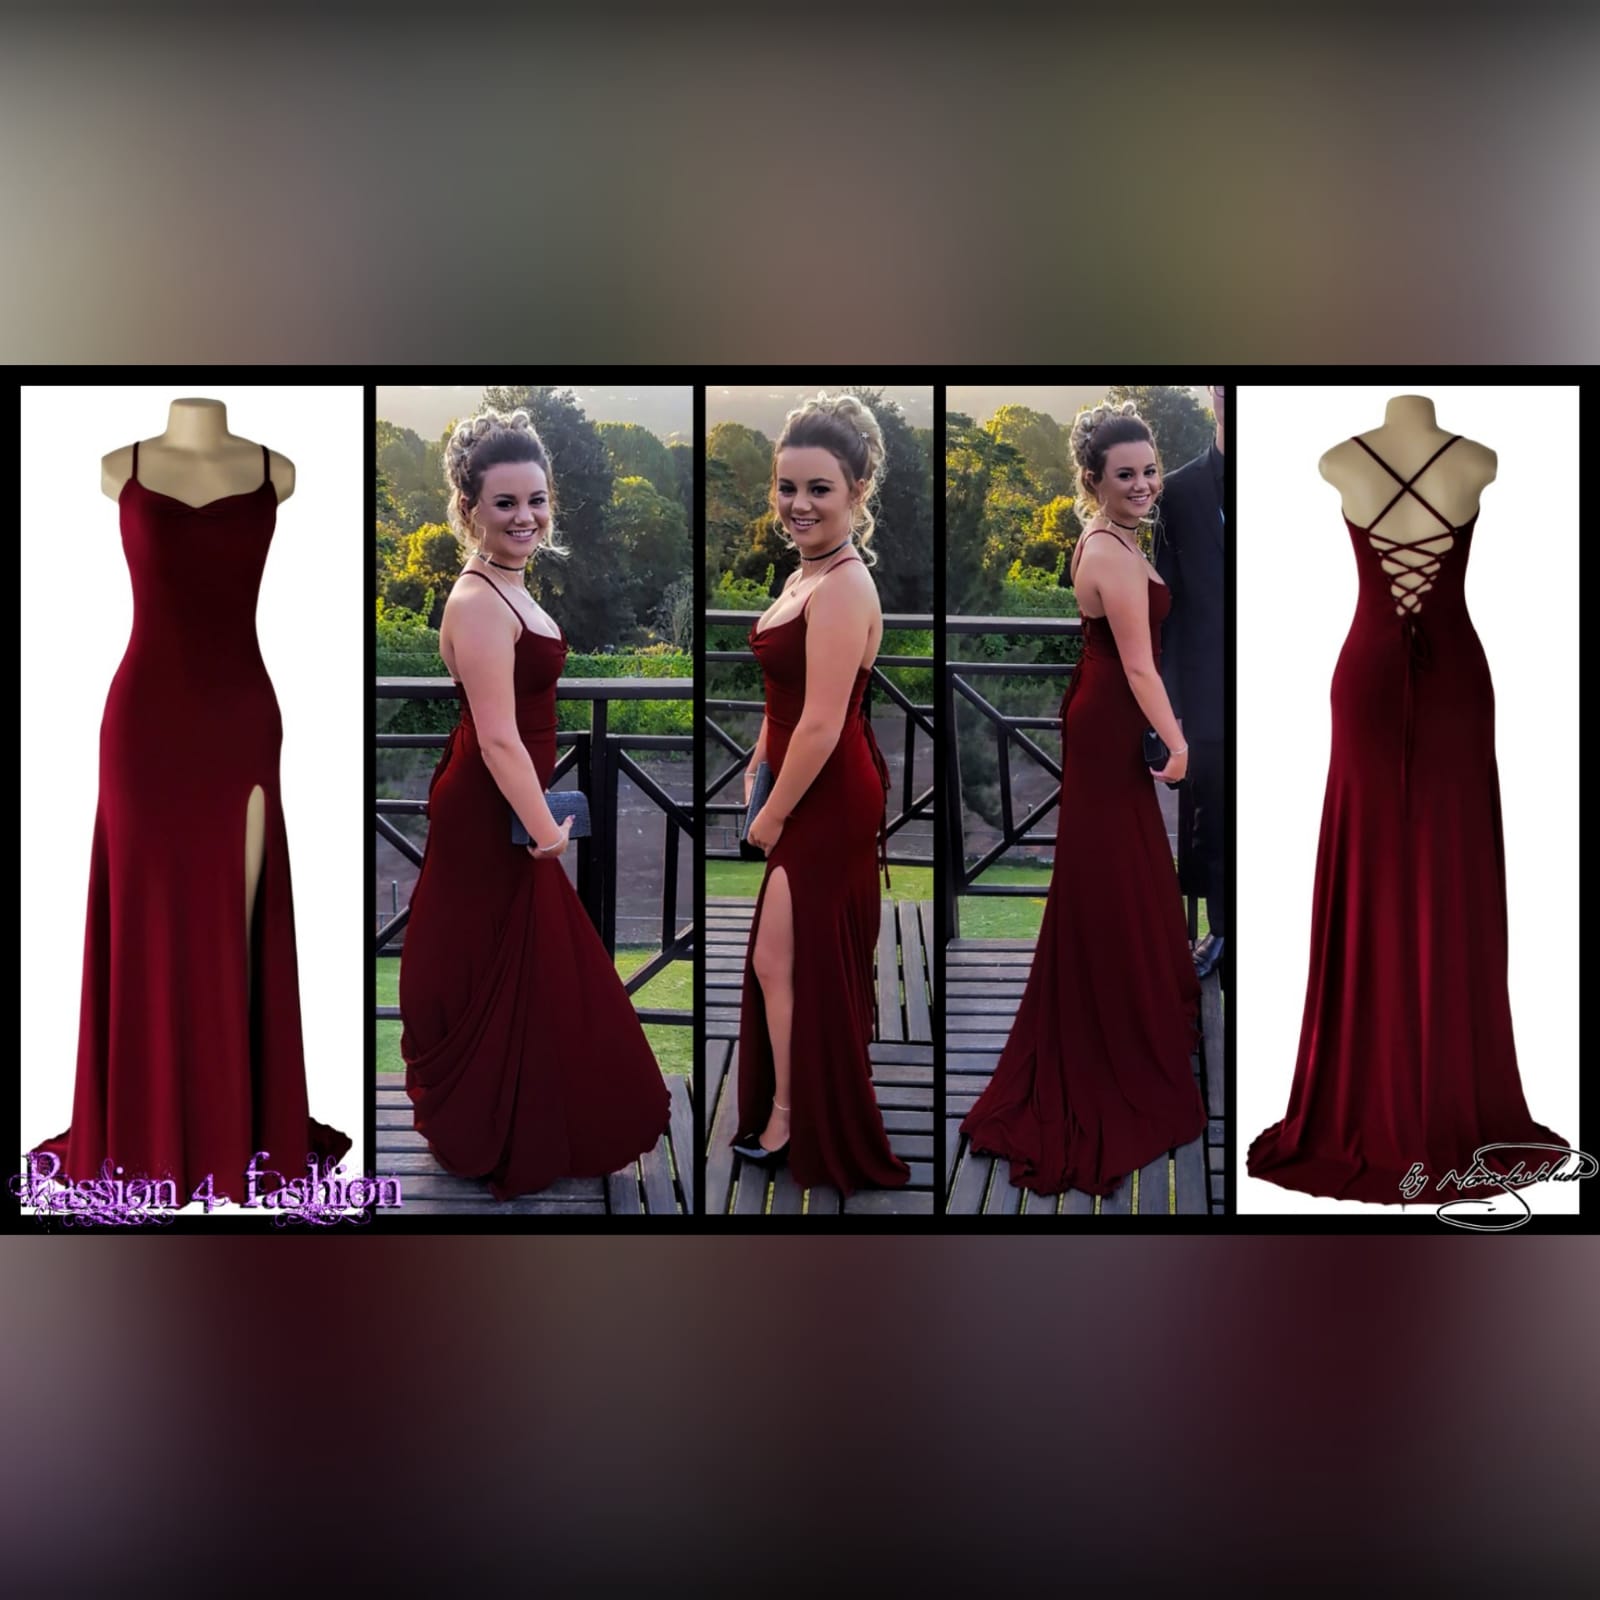 Maroon lace-up back long simple matric dance dress 5 maroon lace-up back long simple matric dance dress with thin shoulder straps, high slit and a small train. Lace-up back to adjust the fit.